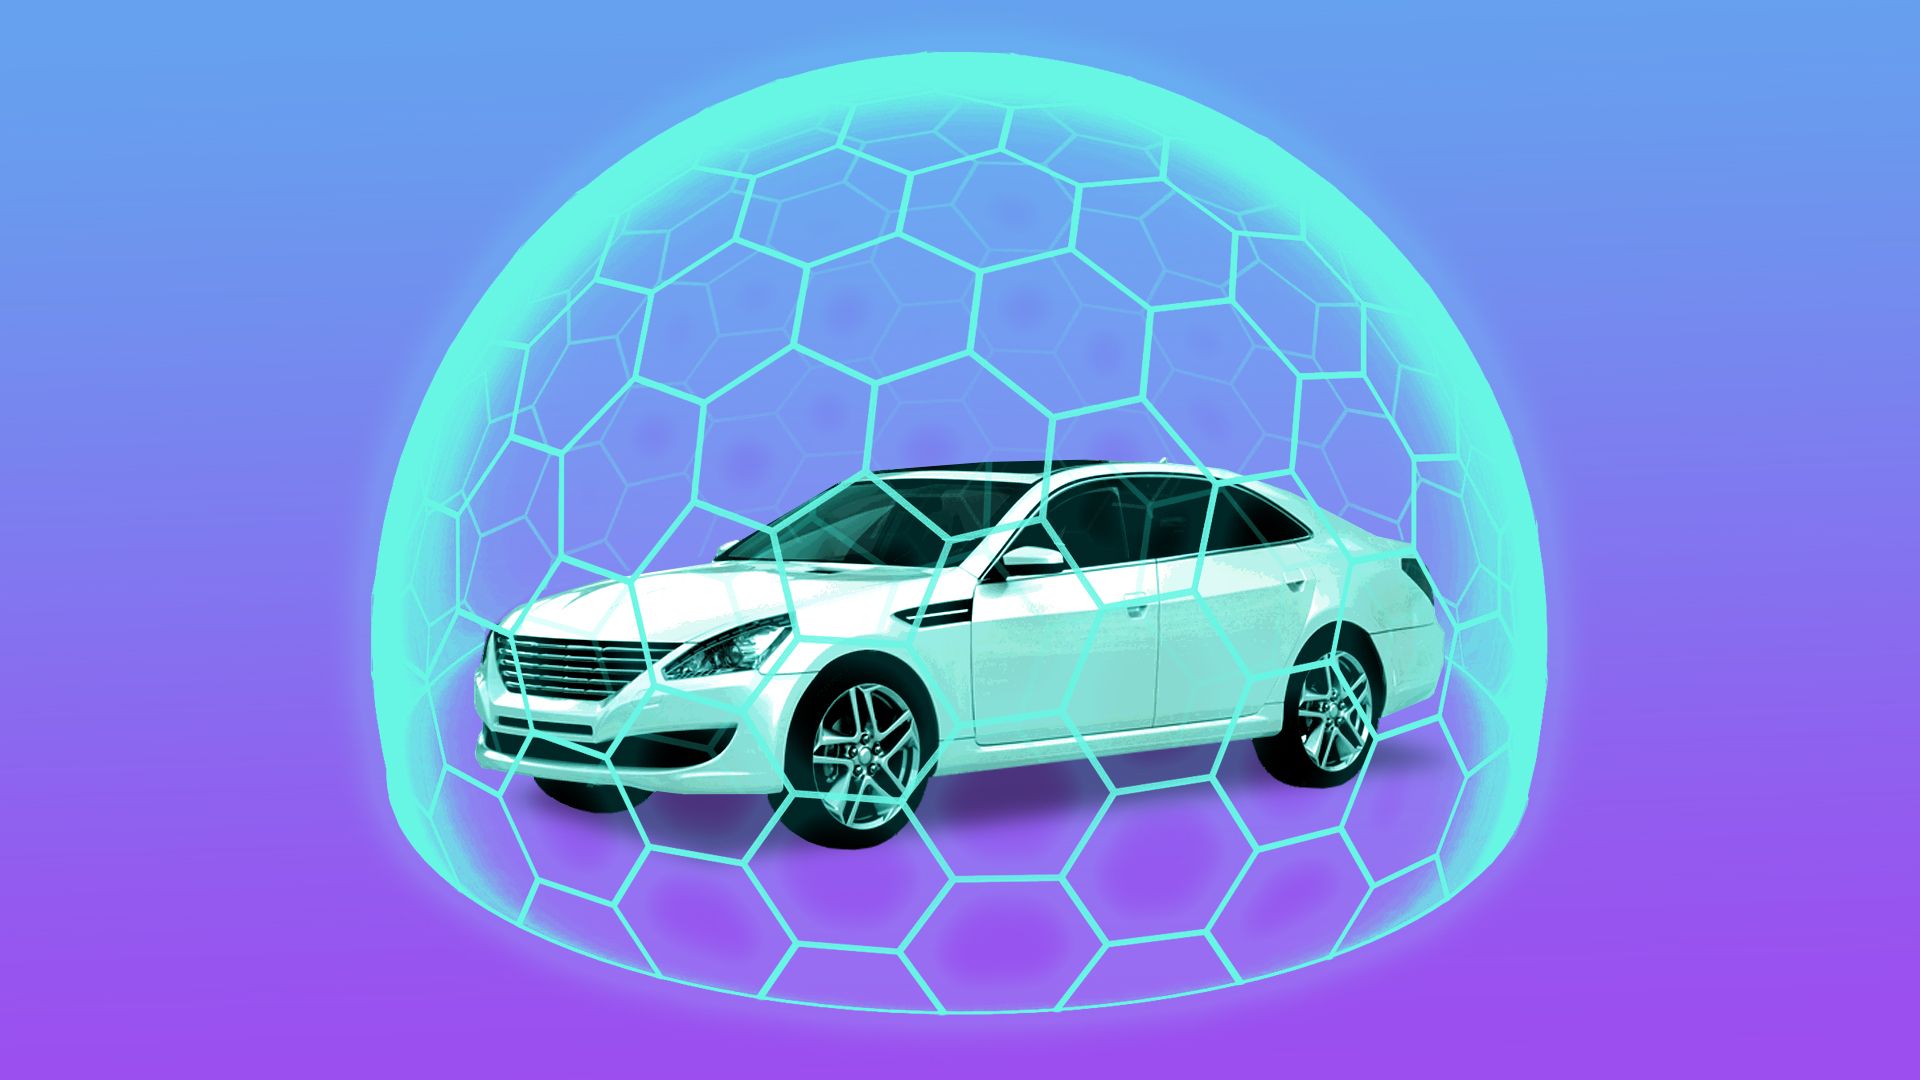 Illustration of car surrounded by artificial intelligence dome